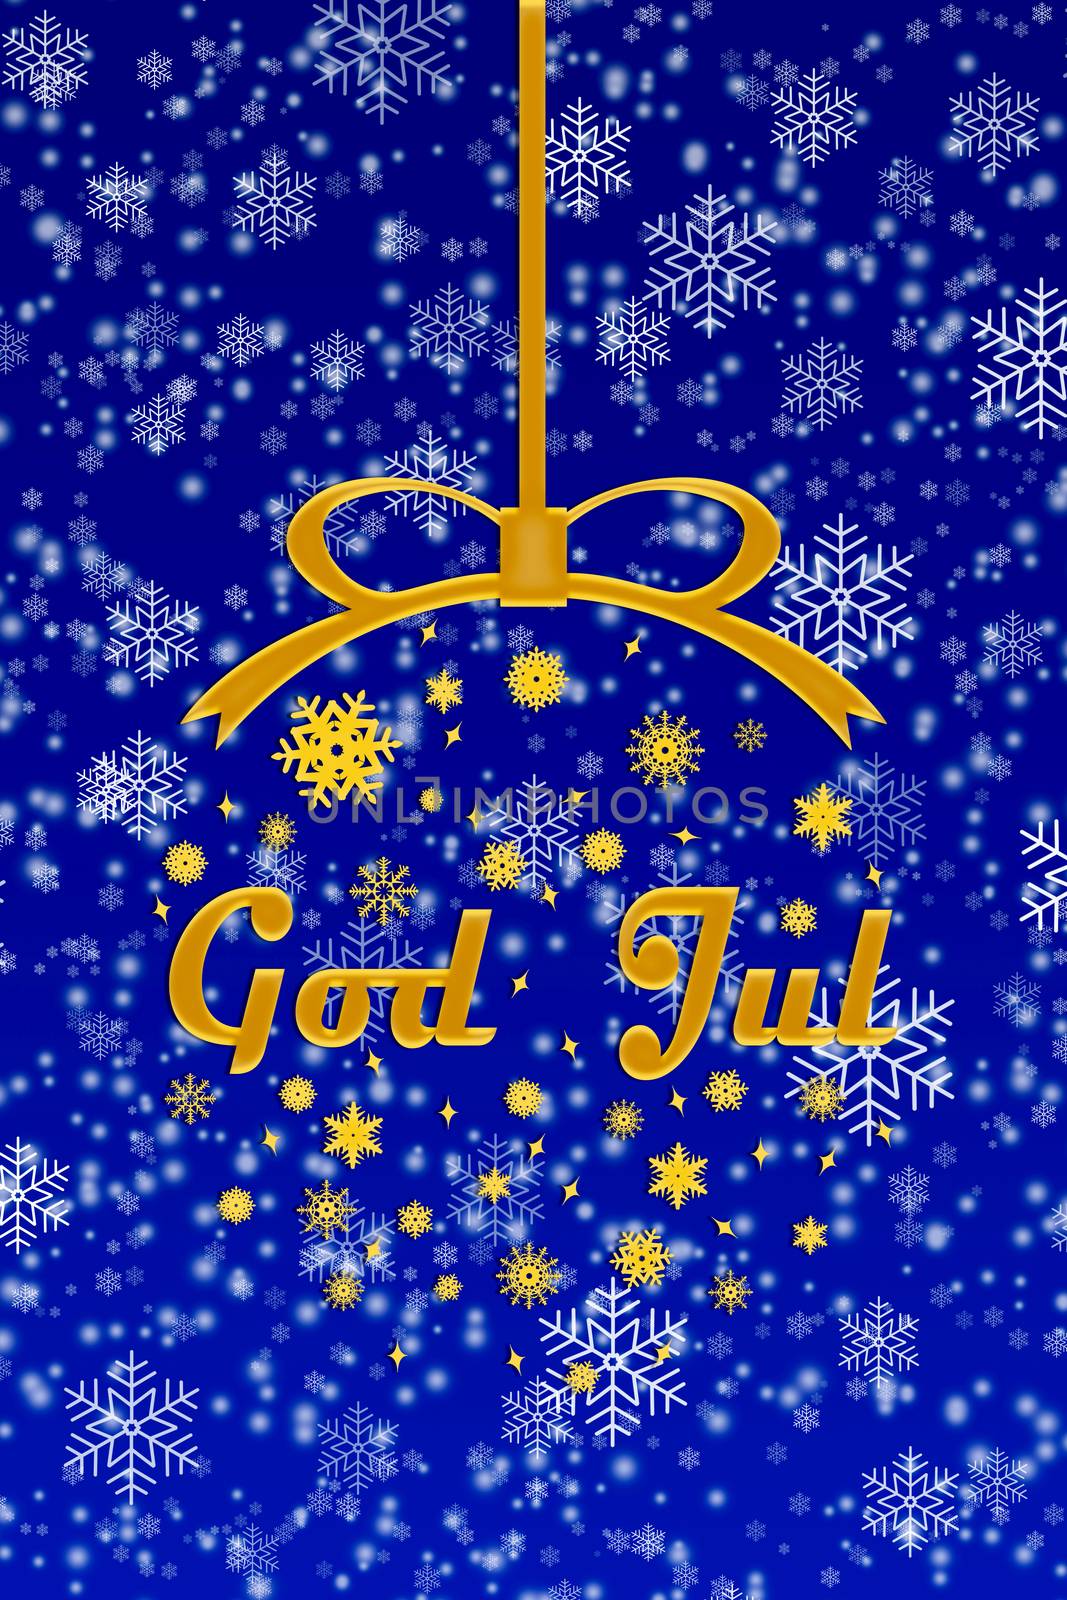 Merry Christmas greetings in Swedish, blue new year background